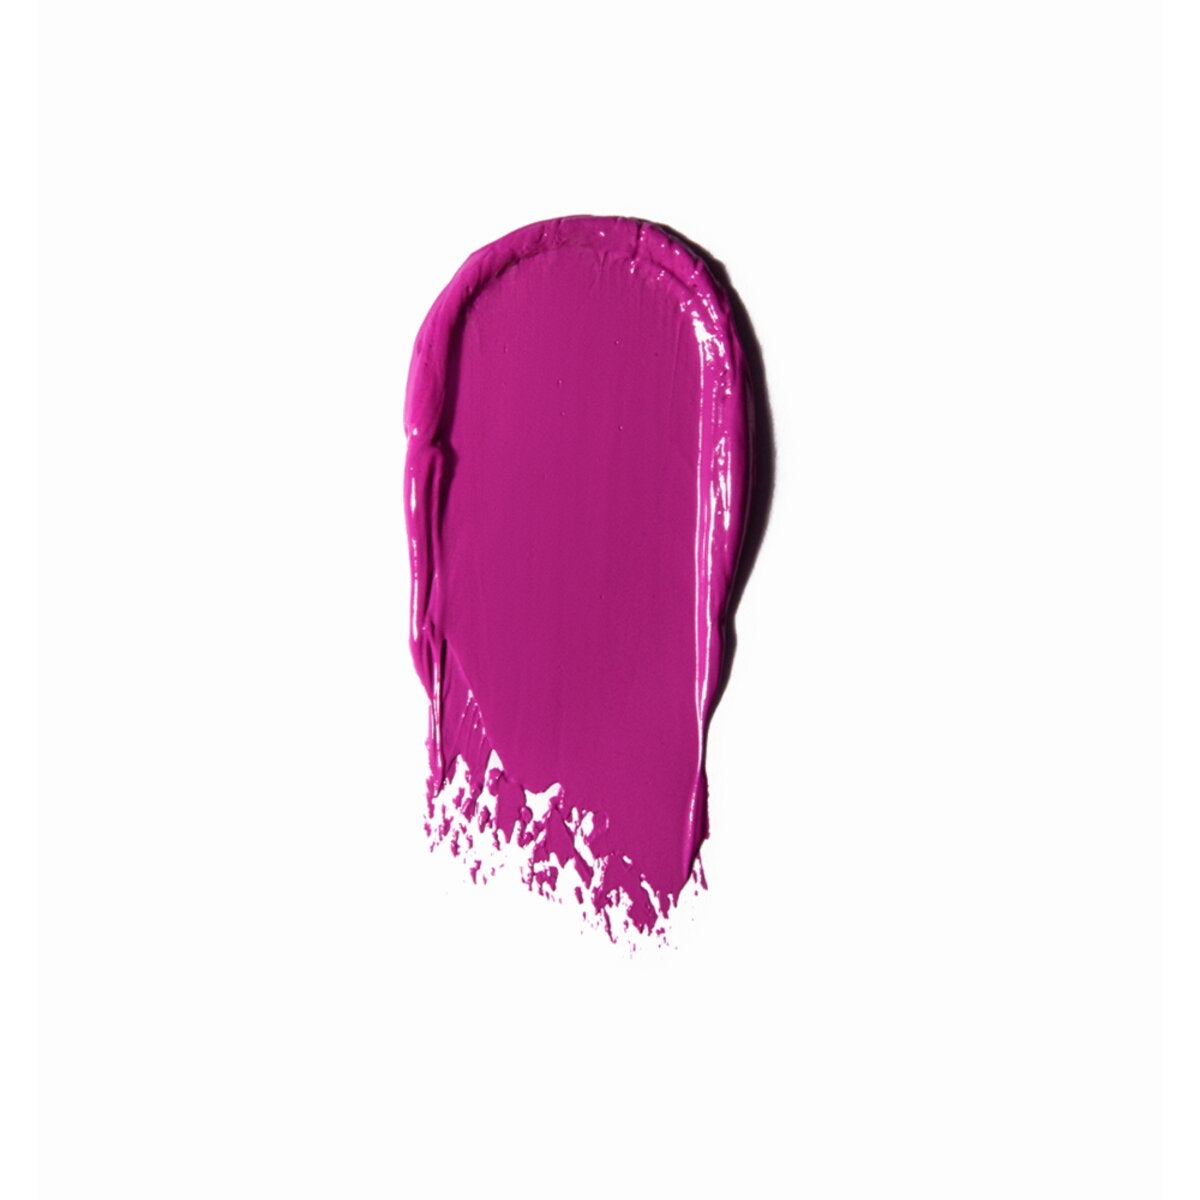 DARE TO BE BRIGHT EYE BASE COLOR PRIMER BERRY IN LOVE - BEAUTY CREATIONS